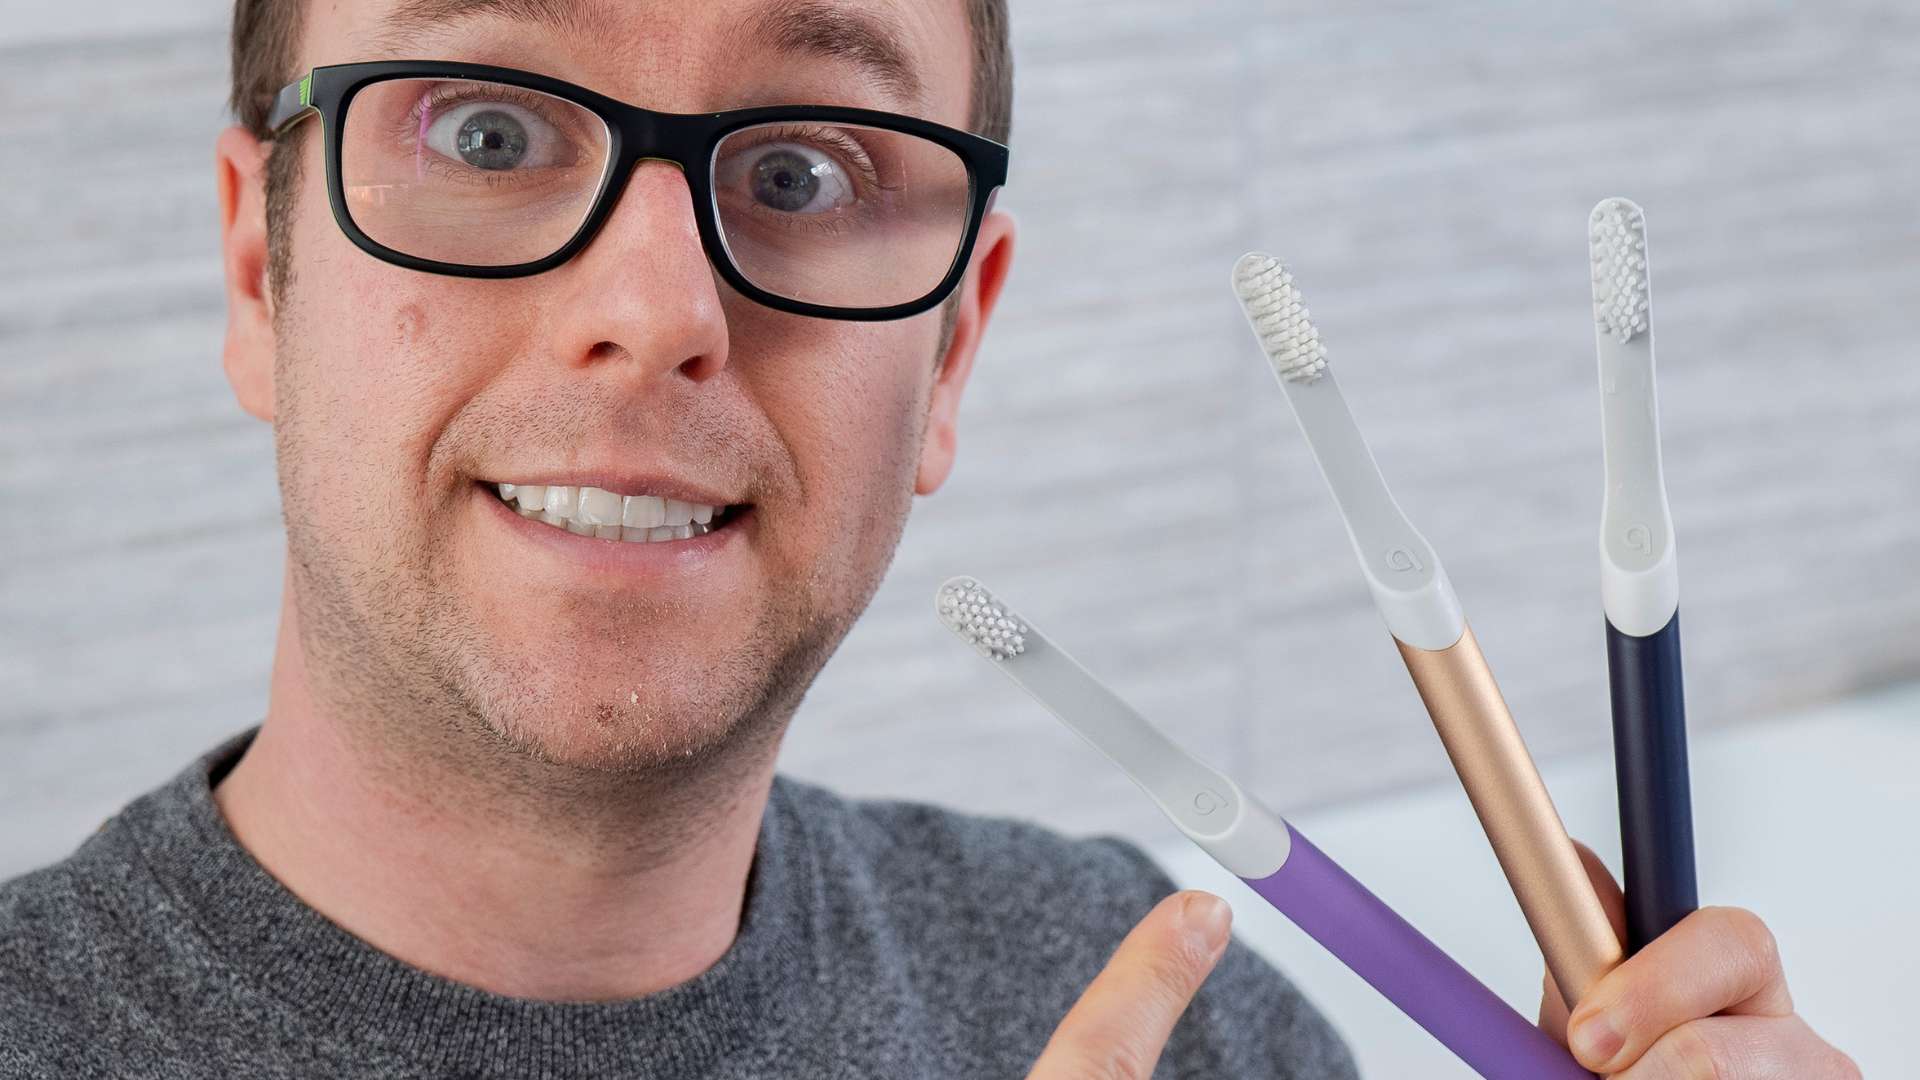 Quip toothbrush review & comparison 1